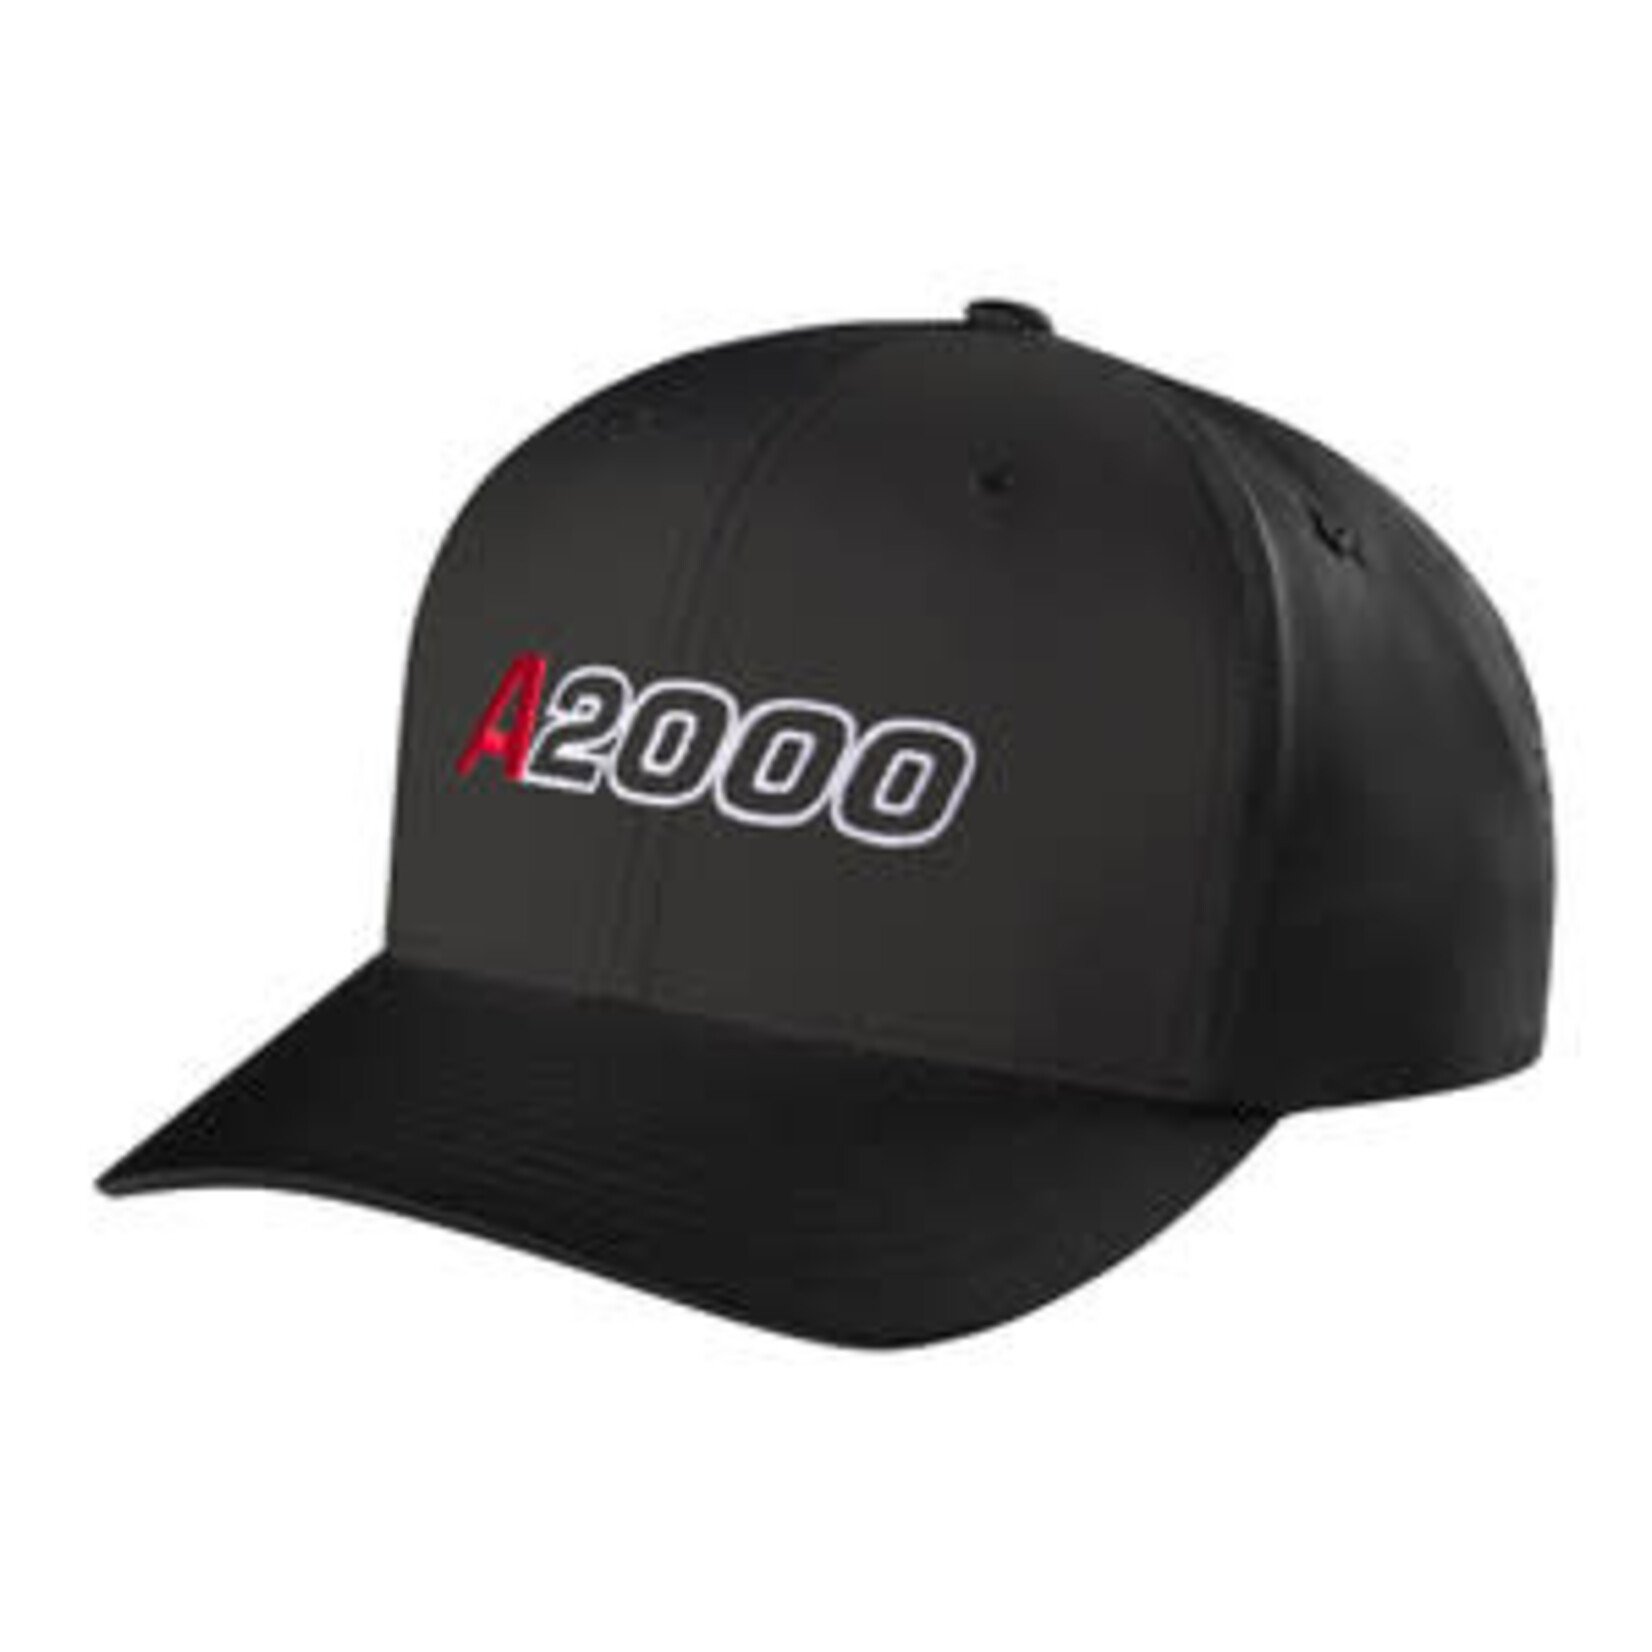 Wilson WILSON A2000 SNAPBACK BLACK BADGE RED/WHITE One size